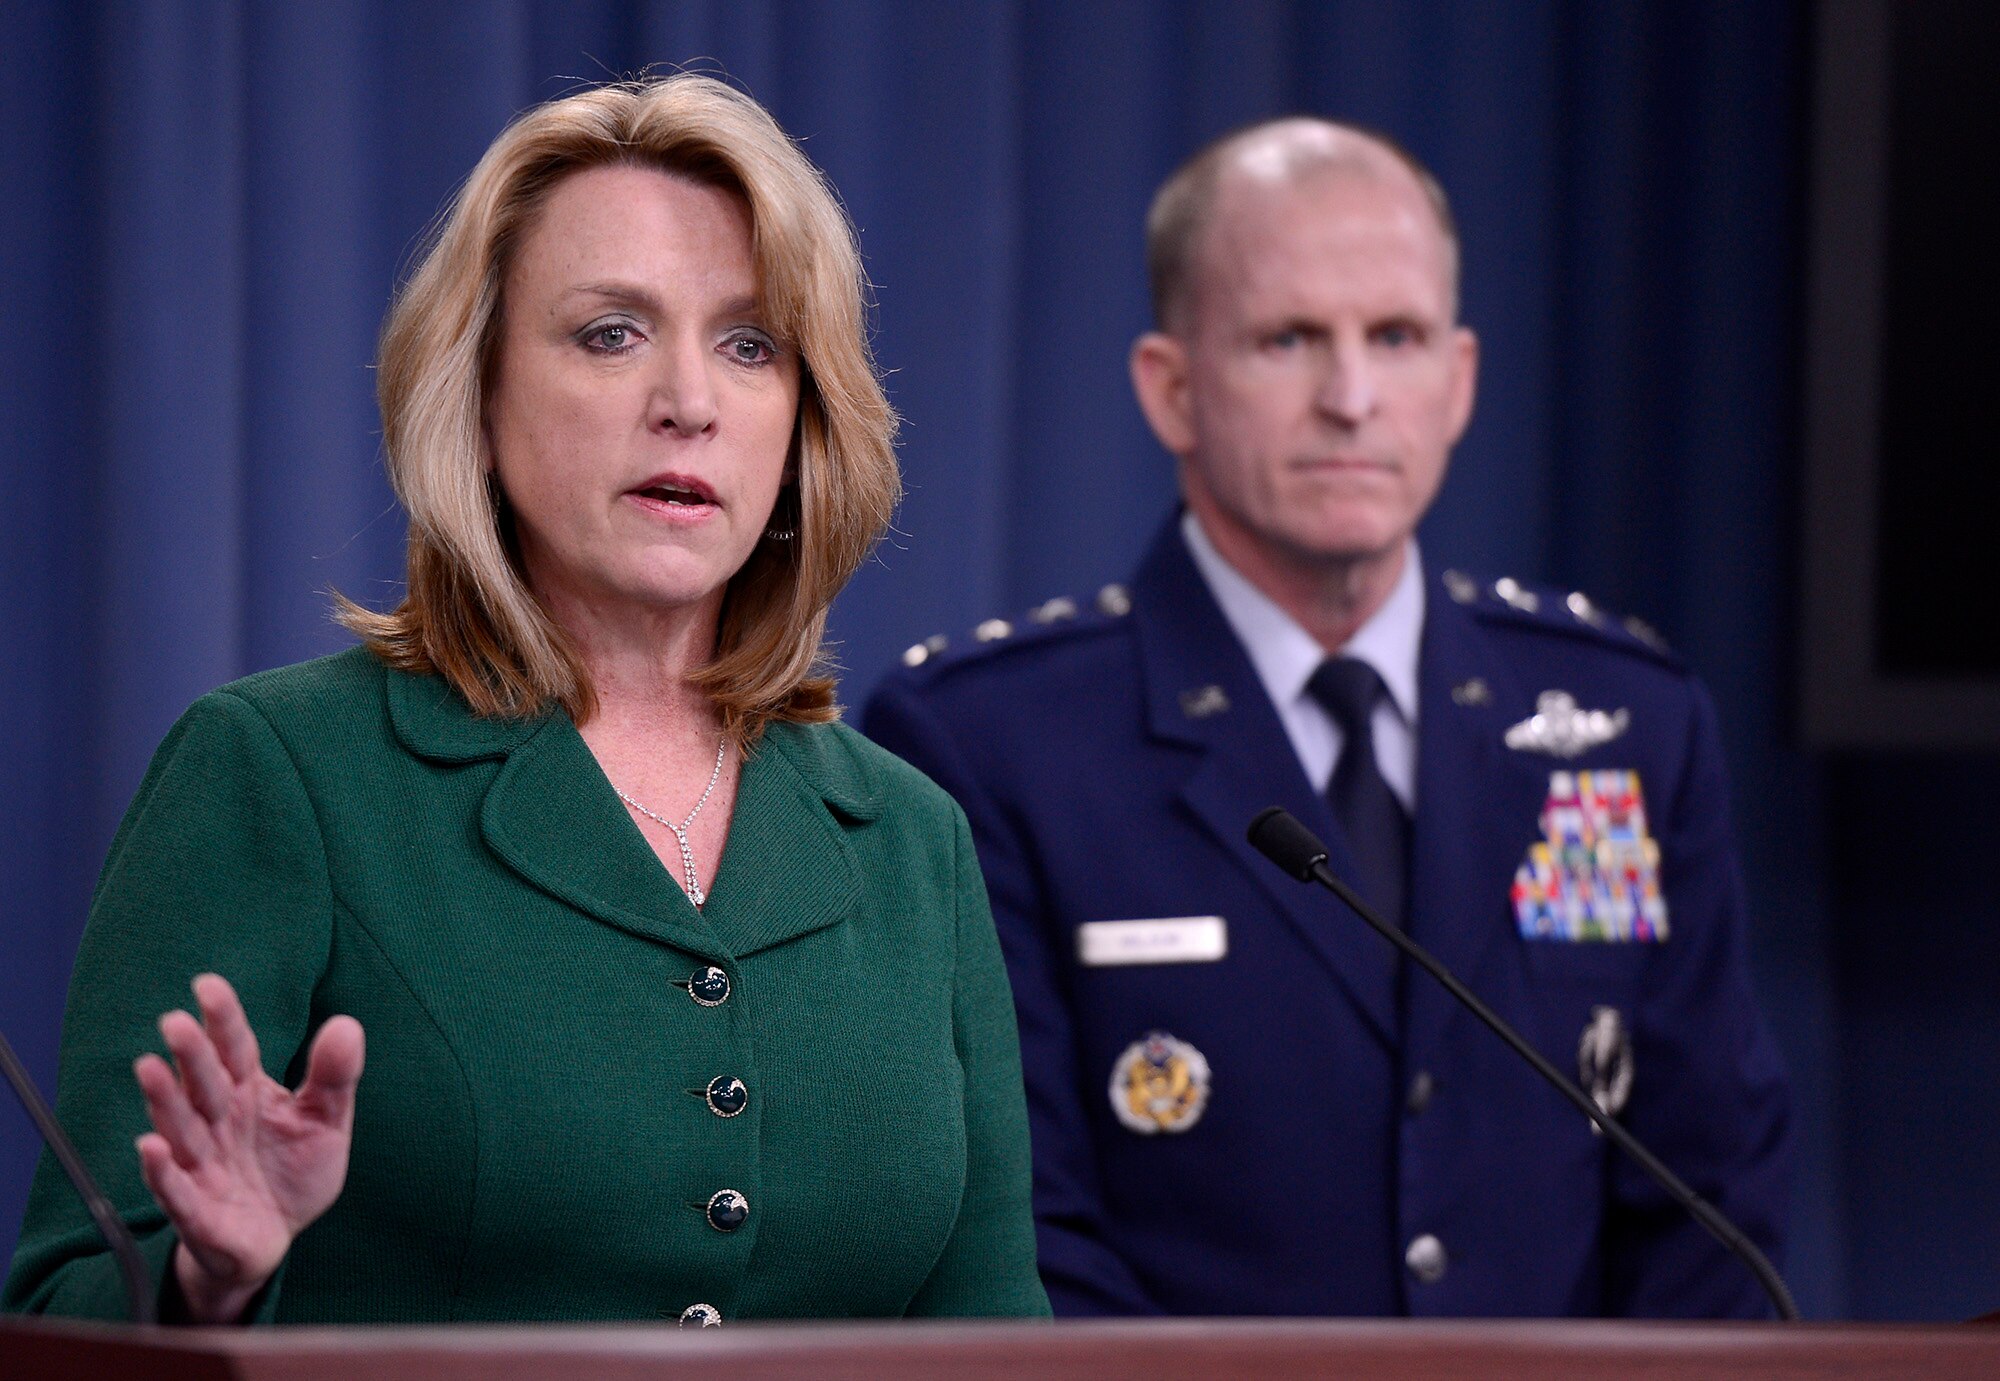 Secretary of the Air Force Deborah Lee James and Lt. Gen Stephen Wilson, commander of Global Strike Command, provide an update, Jan. 30, 2014, in the Pentagon, on the investigation of compromised test materials at Malmstrom Air Force Base, Mont.  During the press briefing, James and Wilson talked about the steps the Air Force and Global Strike Command are taking to address the integrity failure by some officers and measures to address systemic issues affecting the ICBM crew force.  (U.S. Air Force photo/Scott M. Ash)